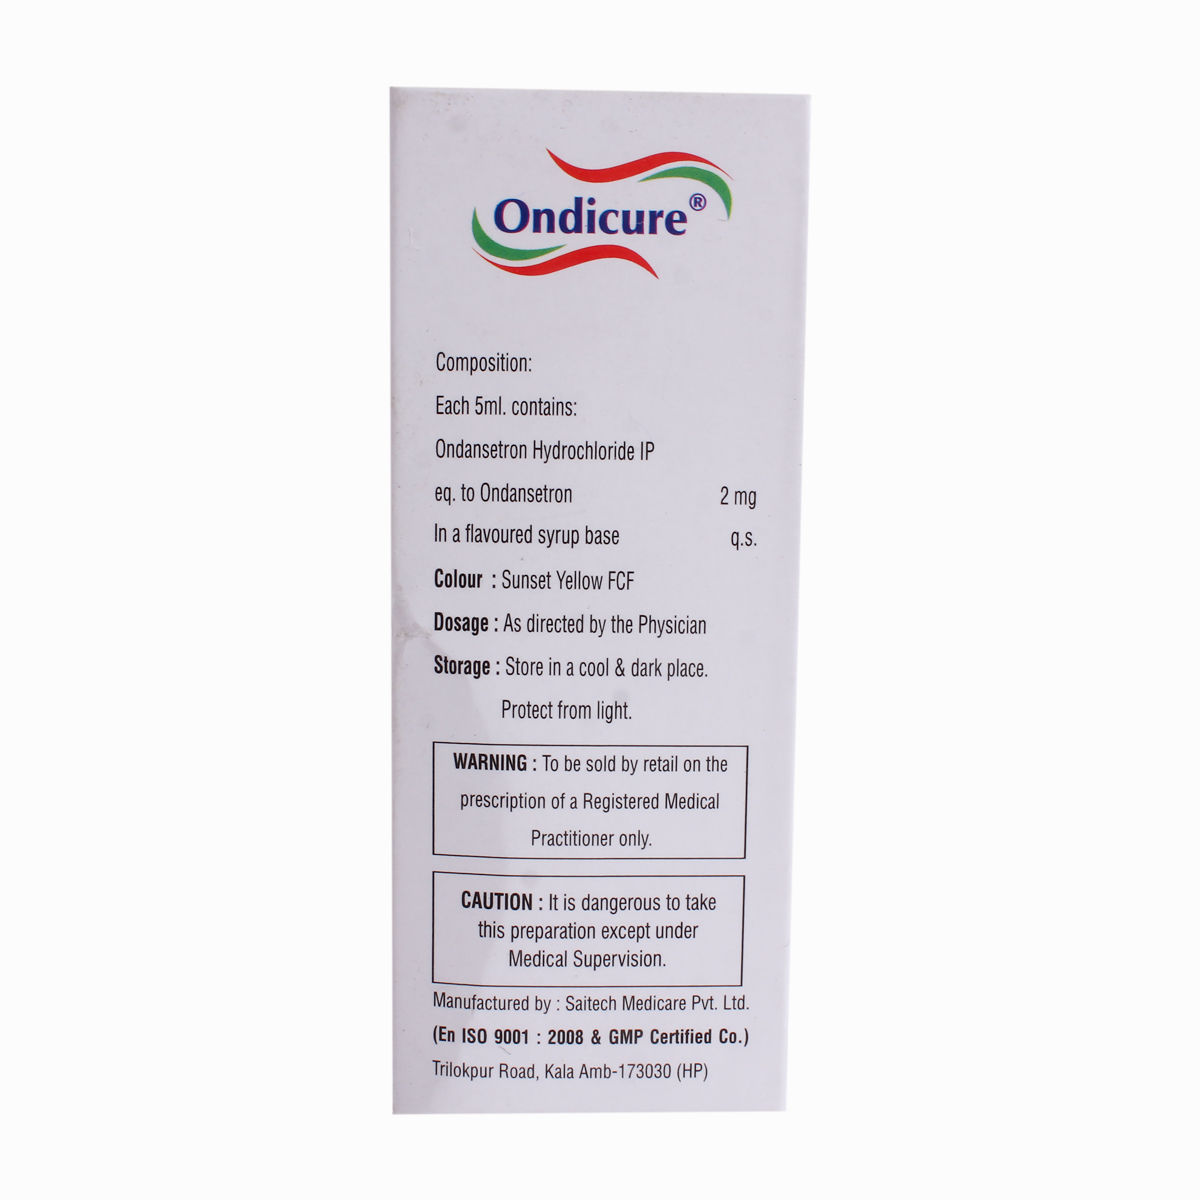 Ondicure Syrup 30 ml, Pack of 1 Liquid